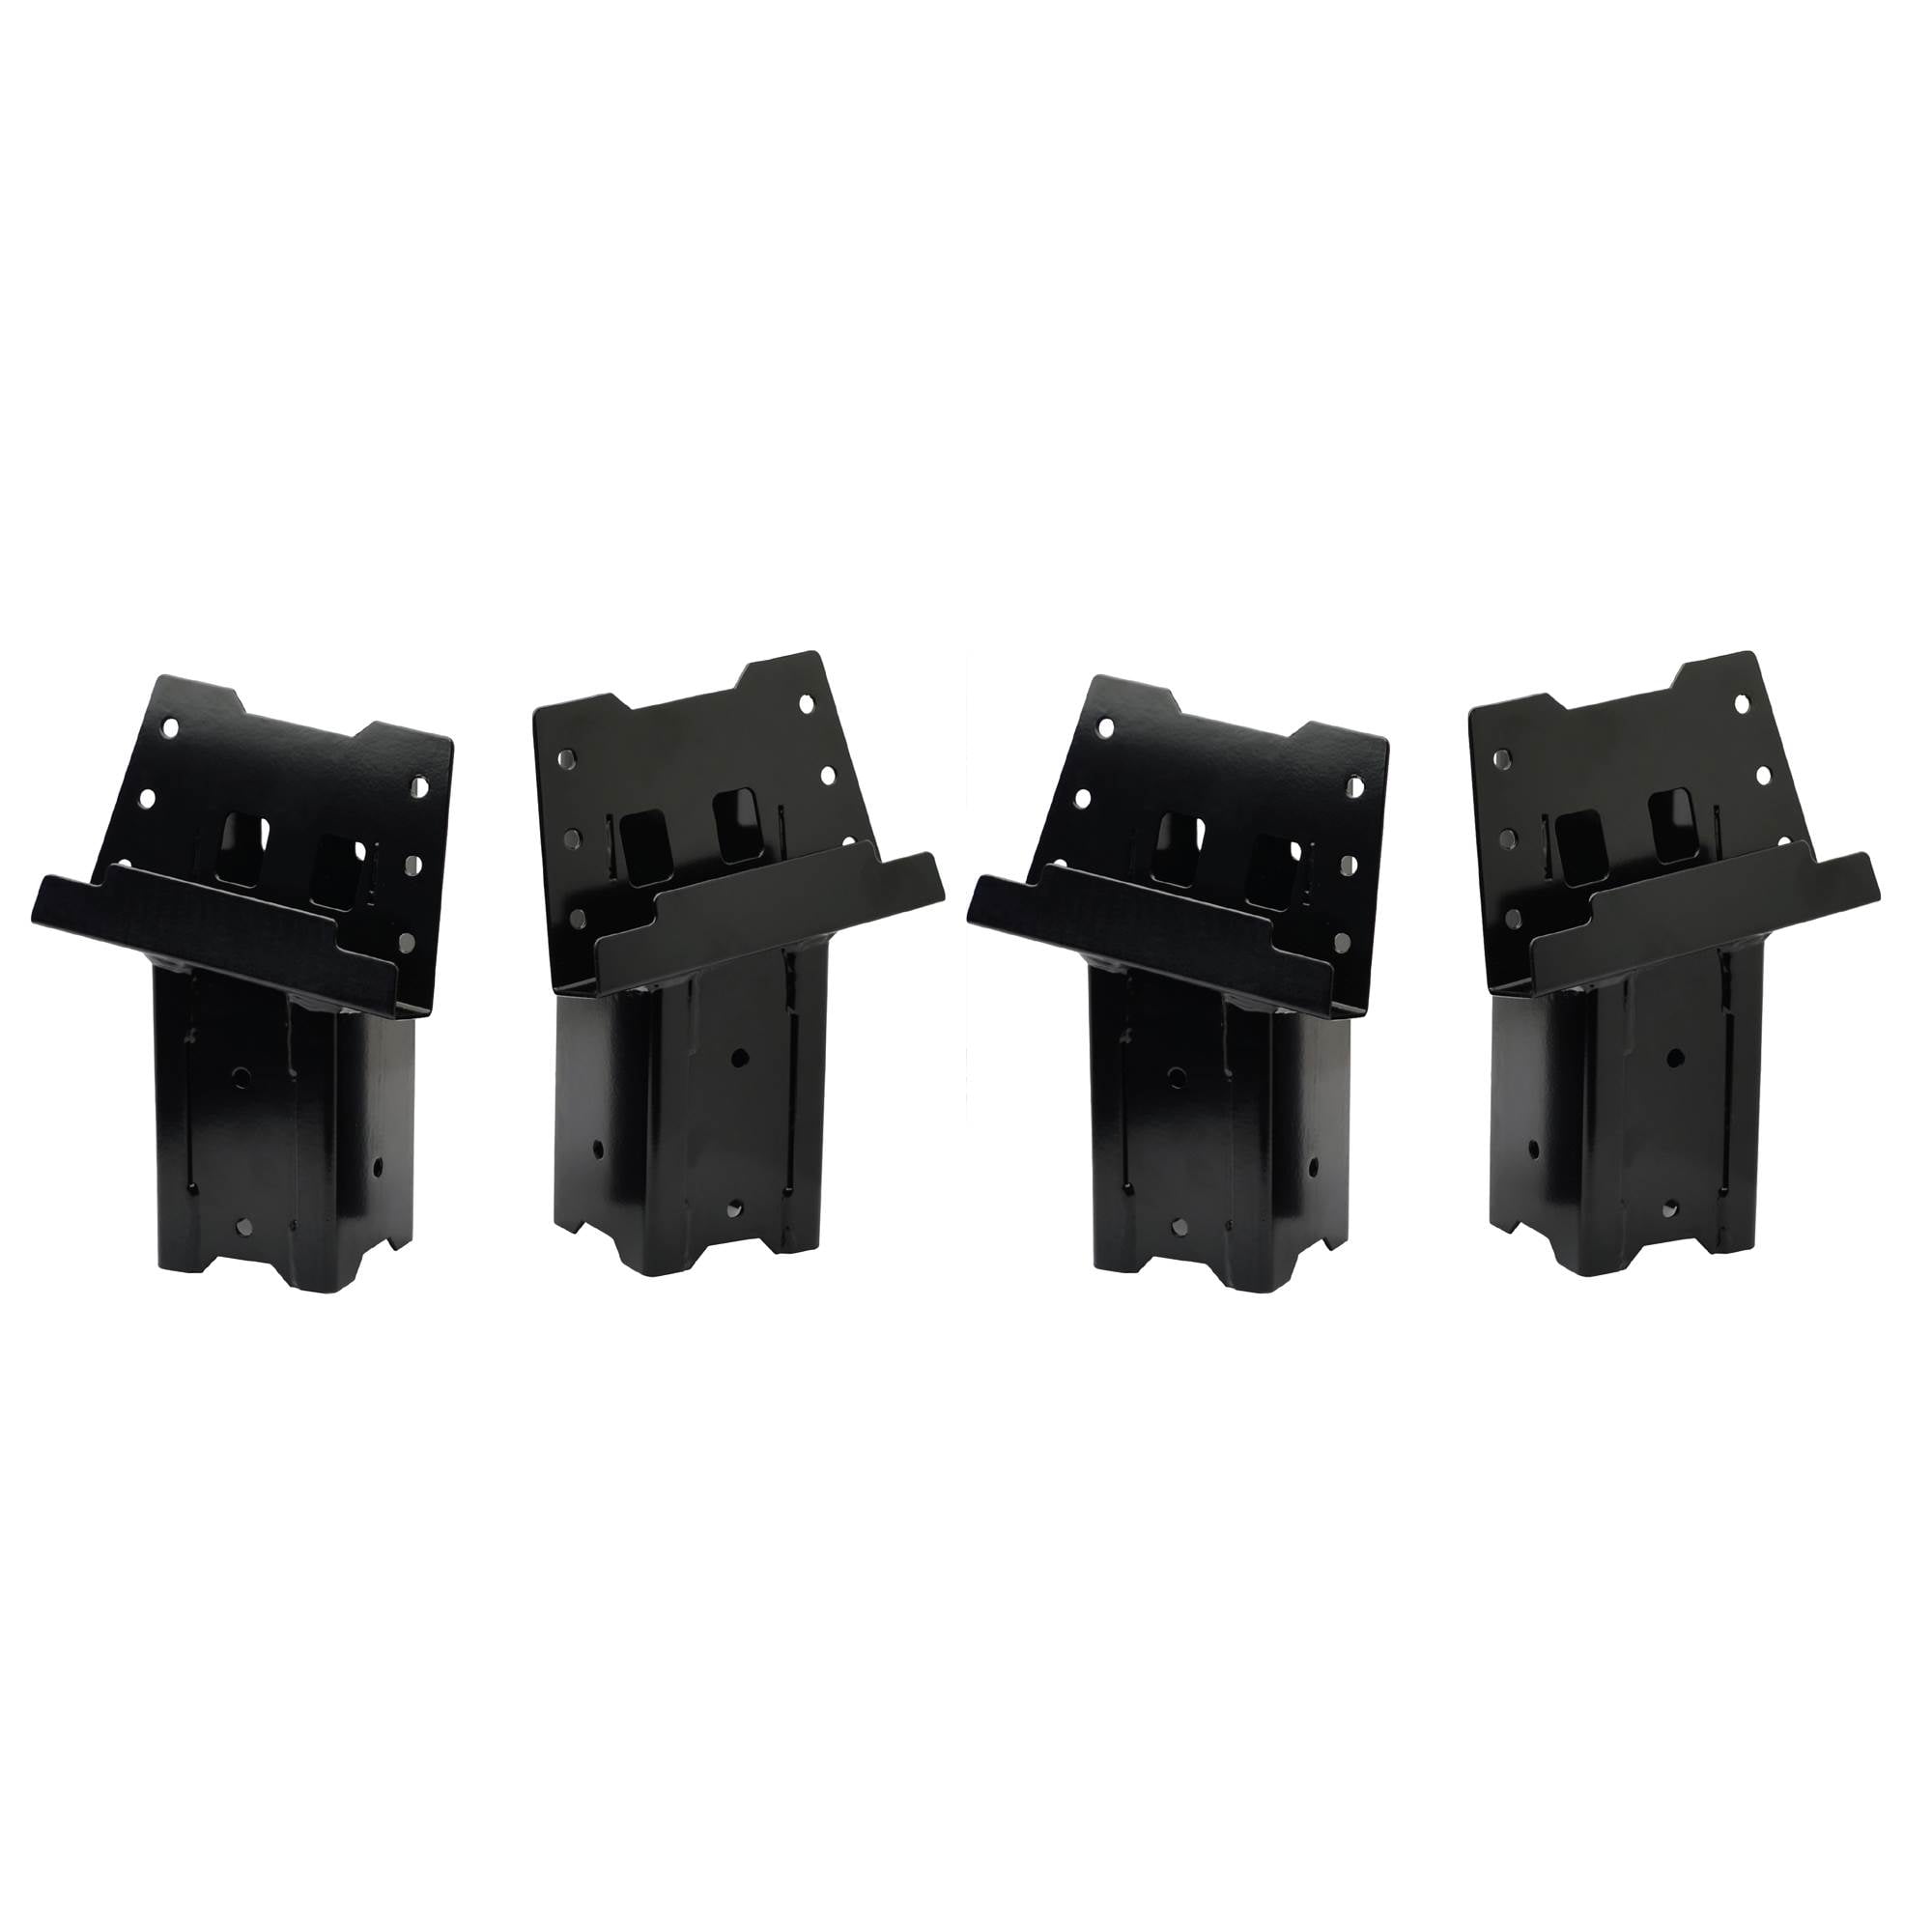 Details about   HME 4 x 4 Wood Post Elevated Hunting Blind Steel Post Brackets 4 Pack 